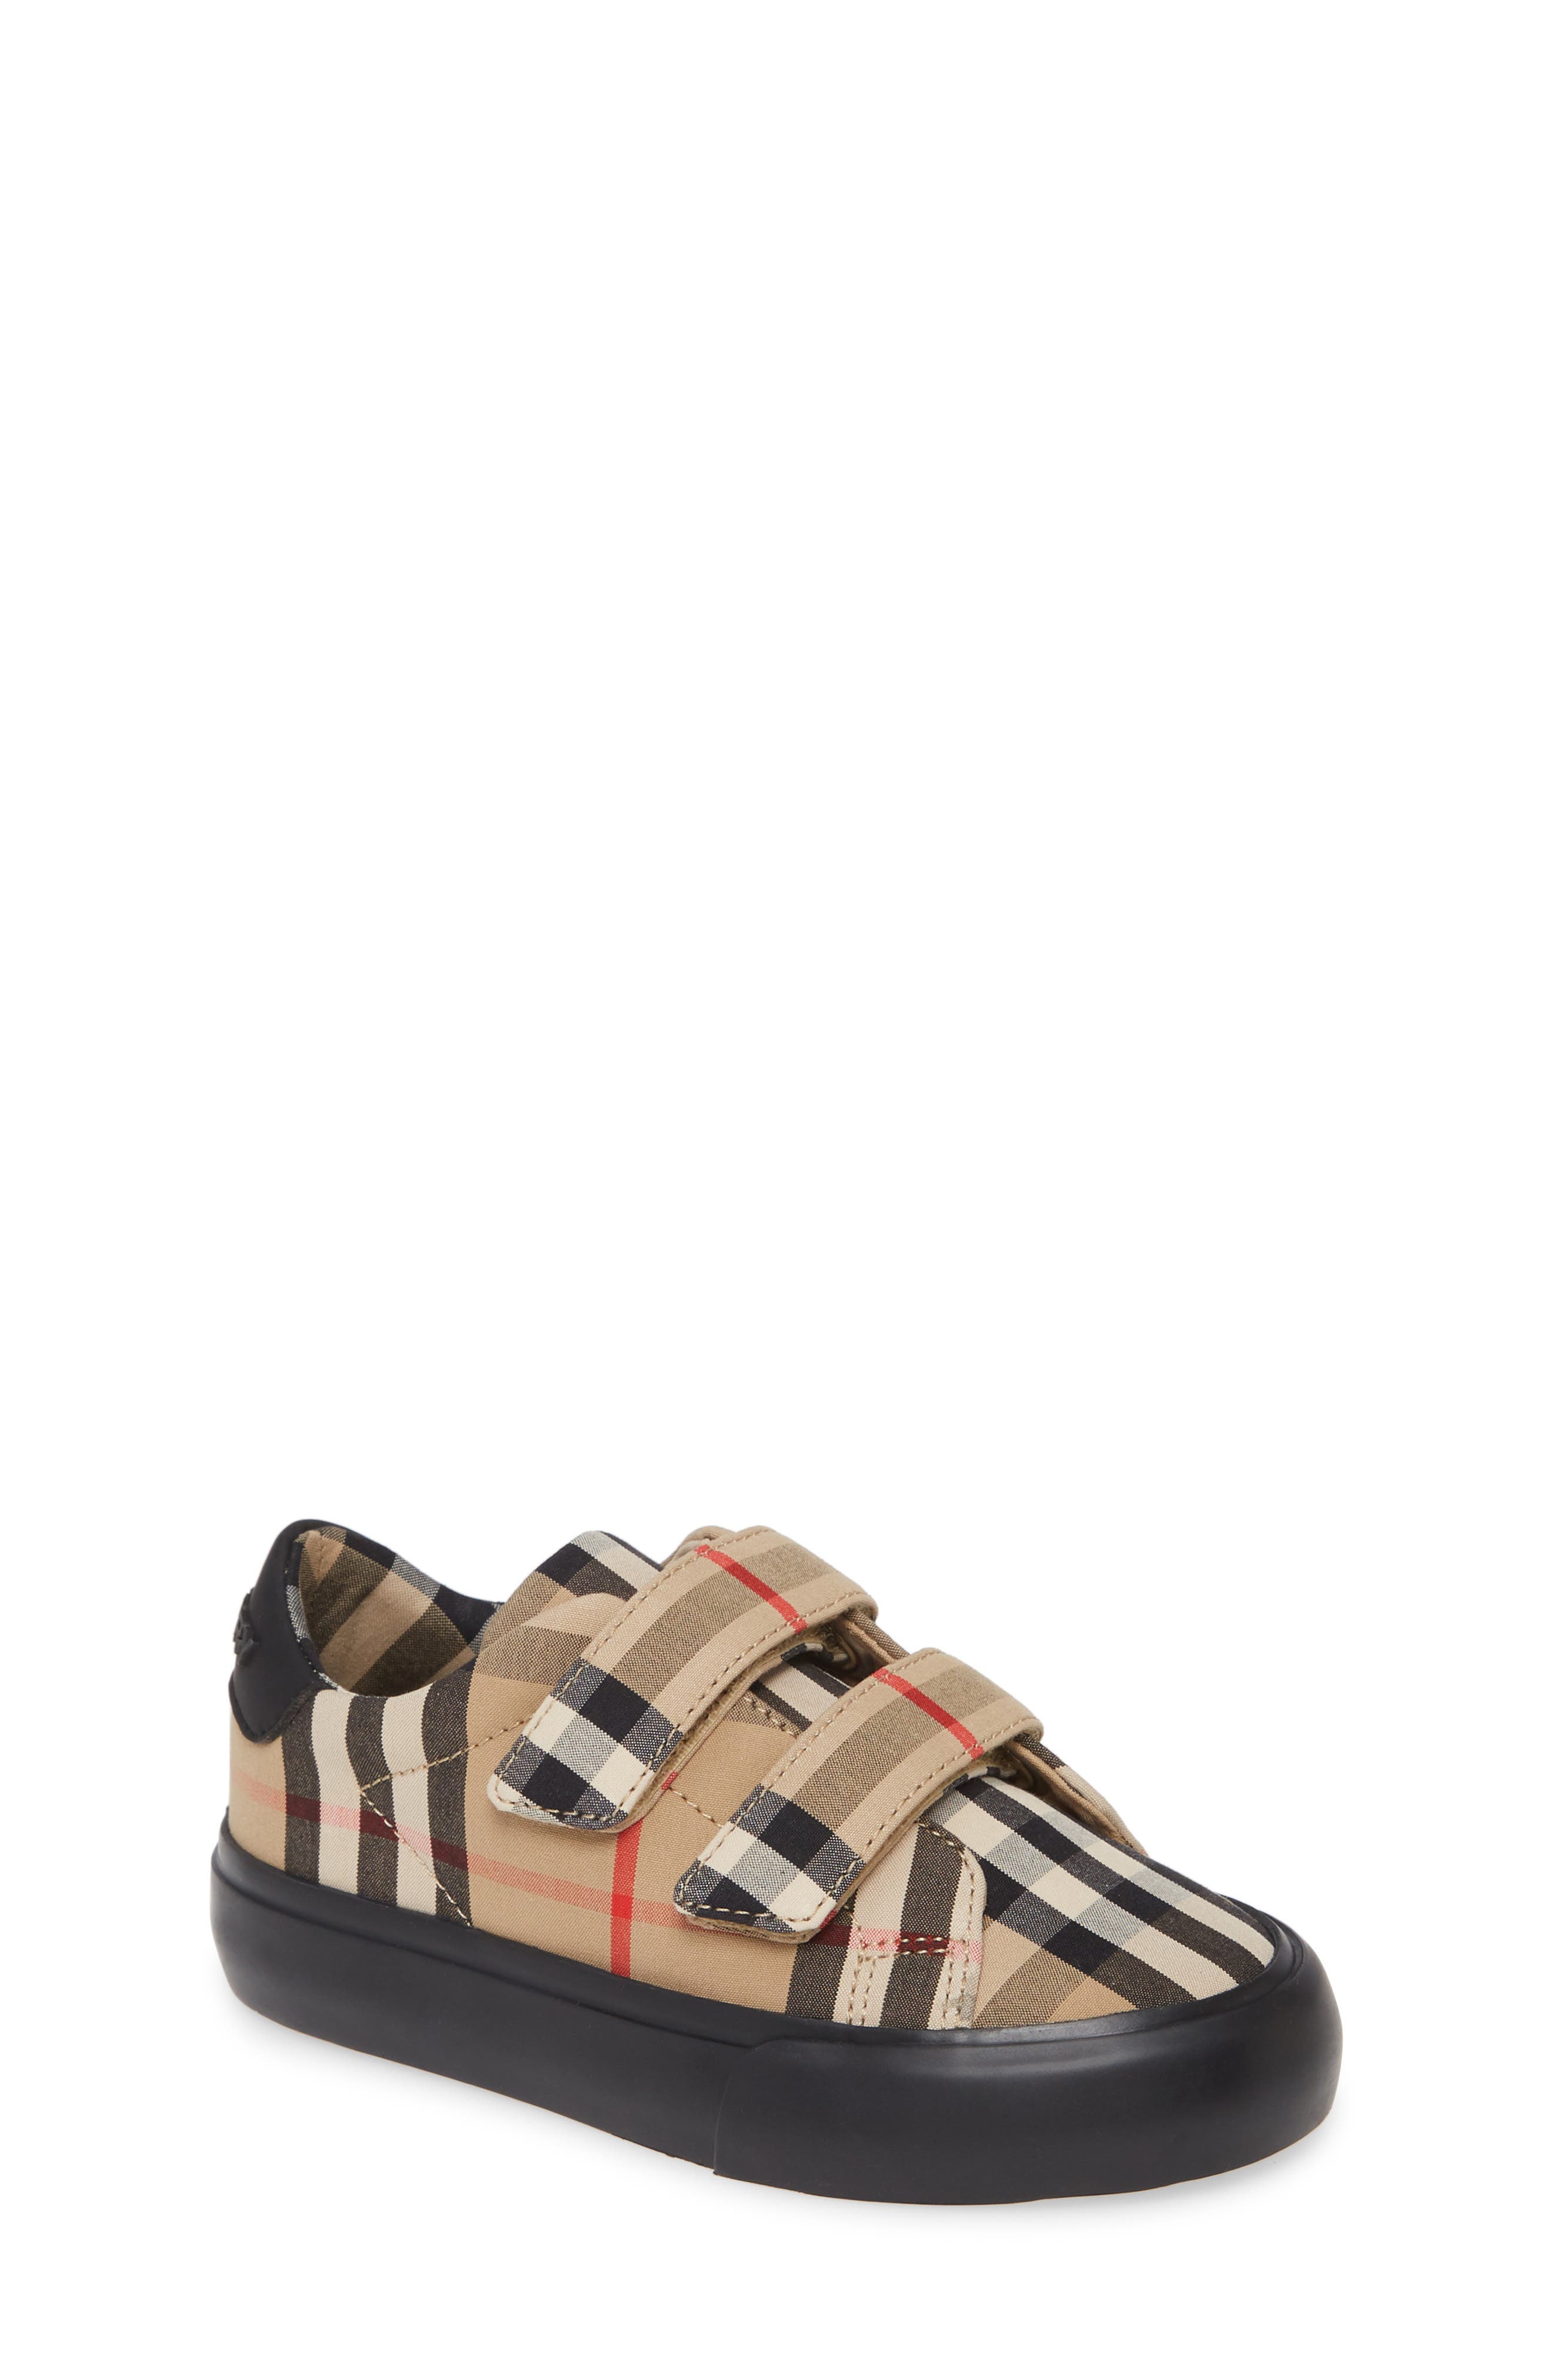 Kids For Girls' Burberry Shoes | Nordstrom